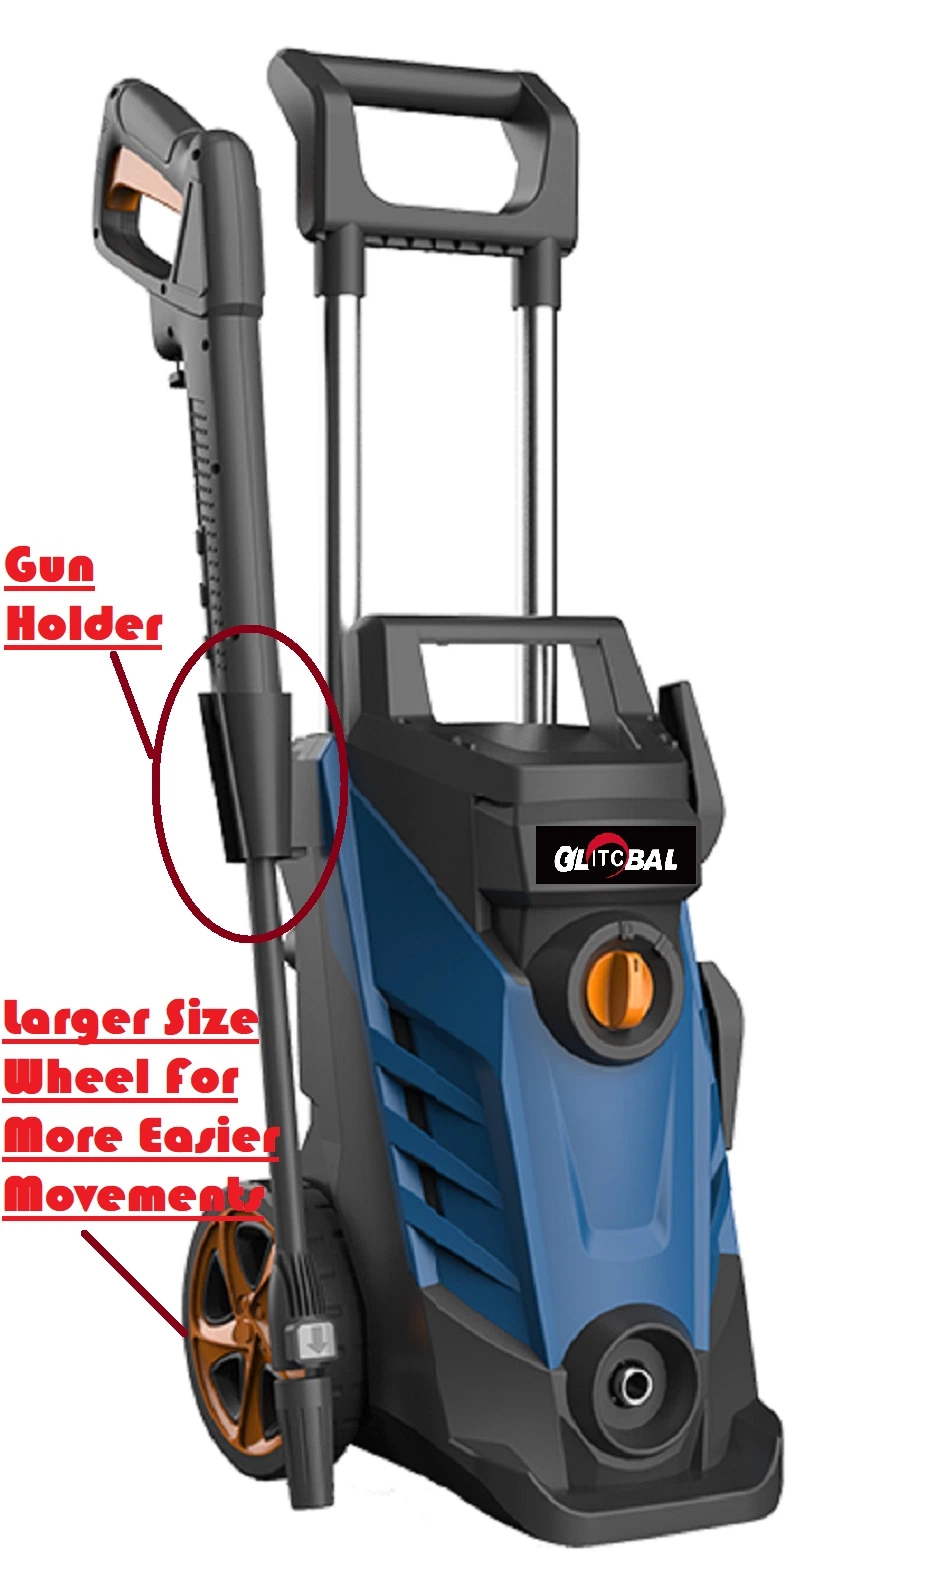 1600W Powerful Electric High Pressure Washer -Cleaning Power Tool